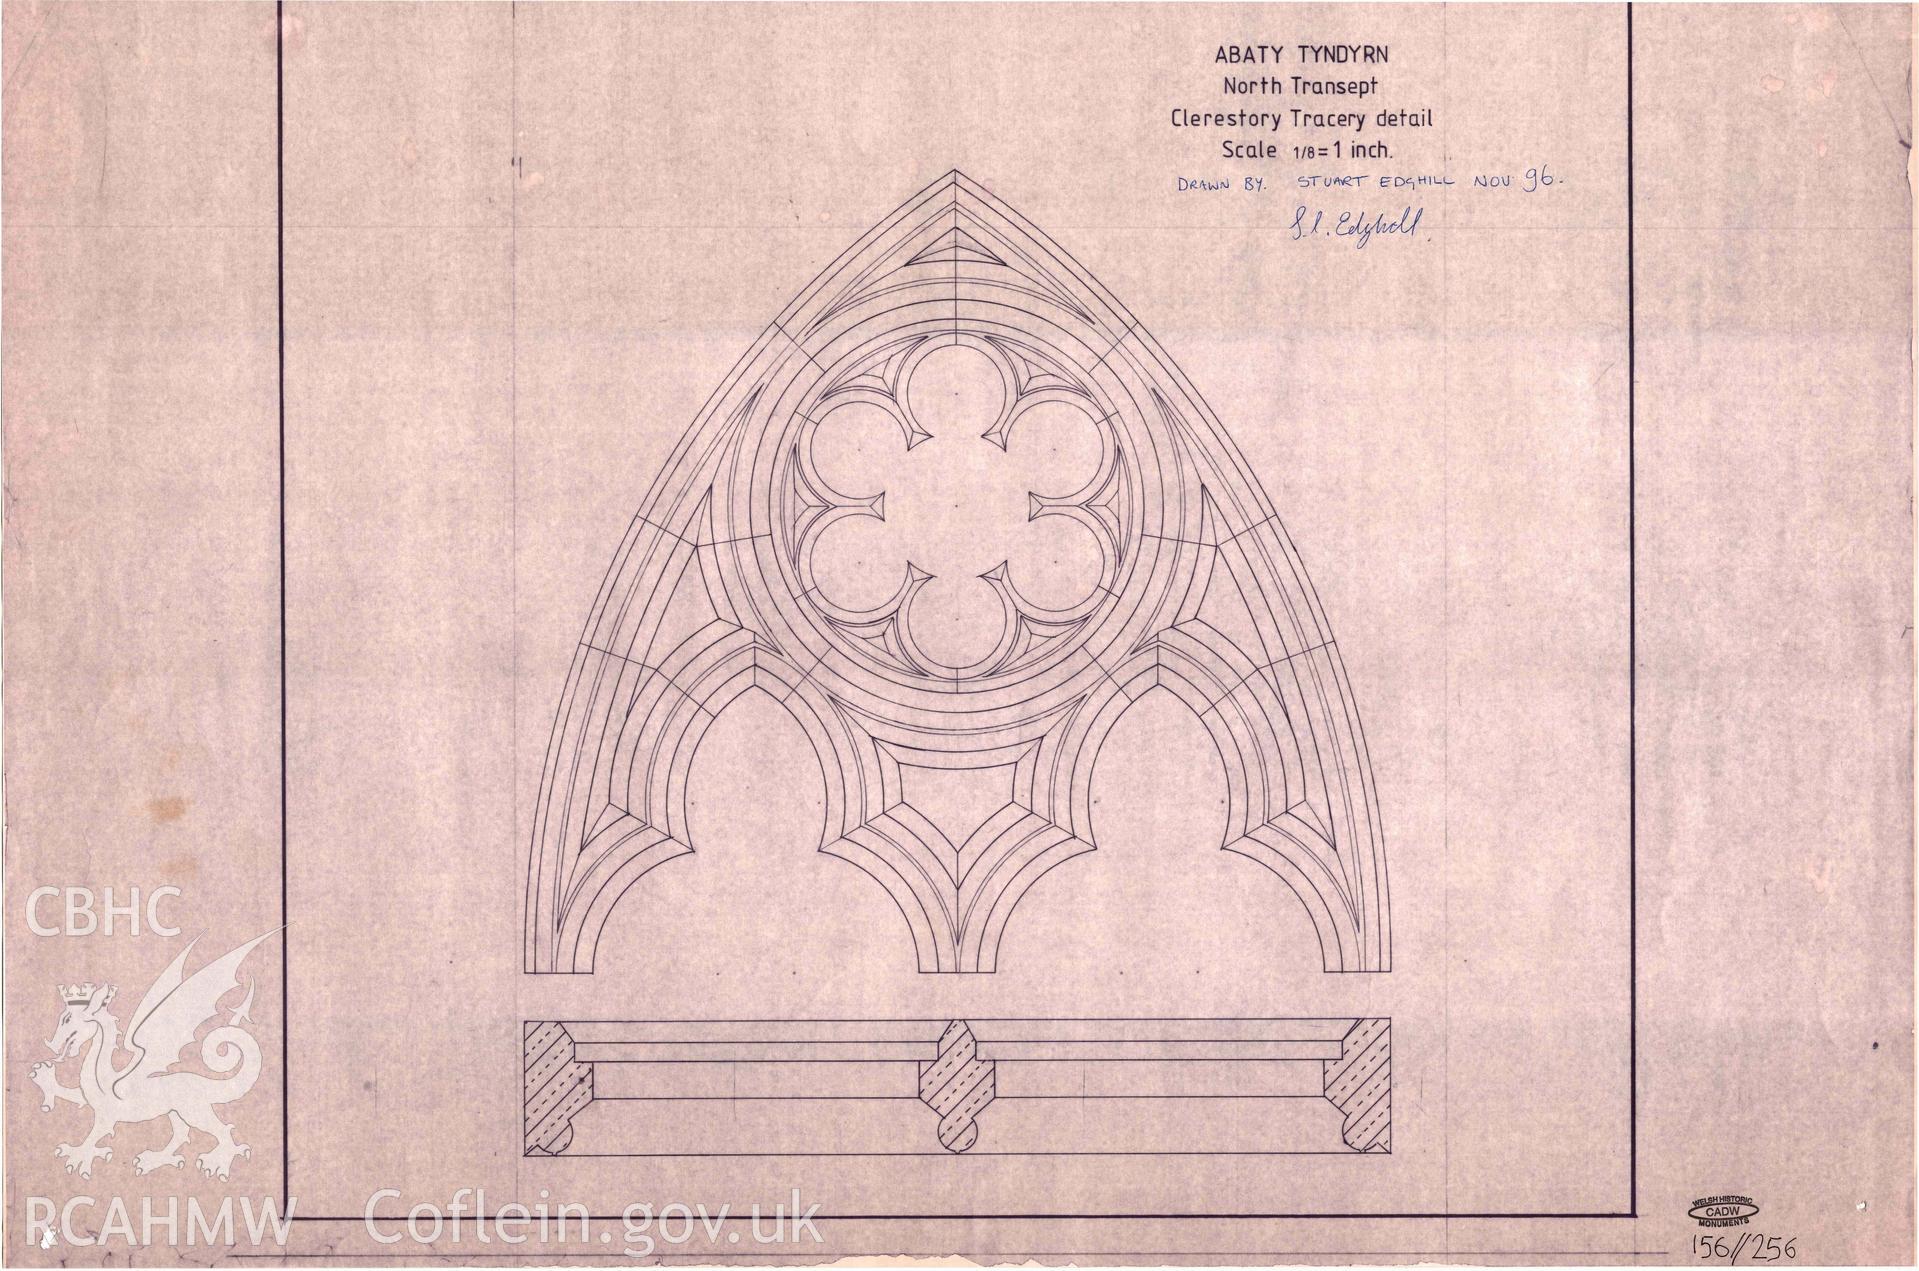 Cadw guardianship monument drawing, north transept, clerestory tracery detail, Tintern Abbey.  Dated November 1996.